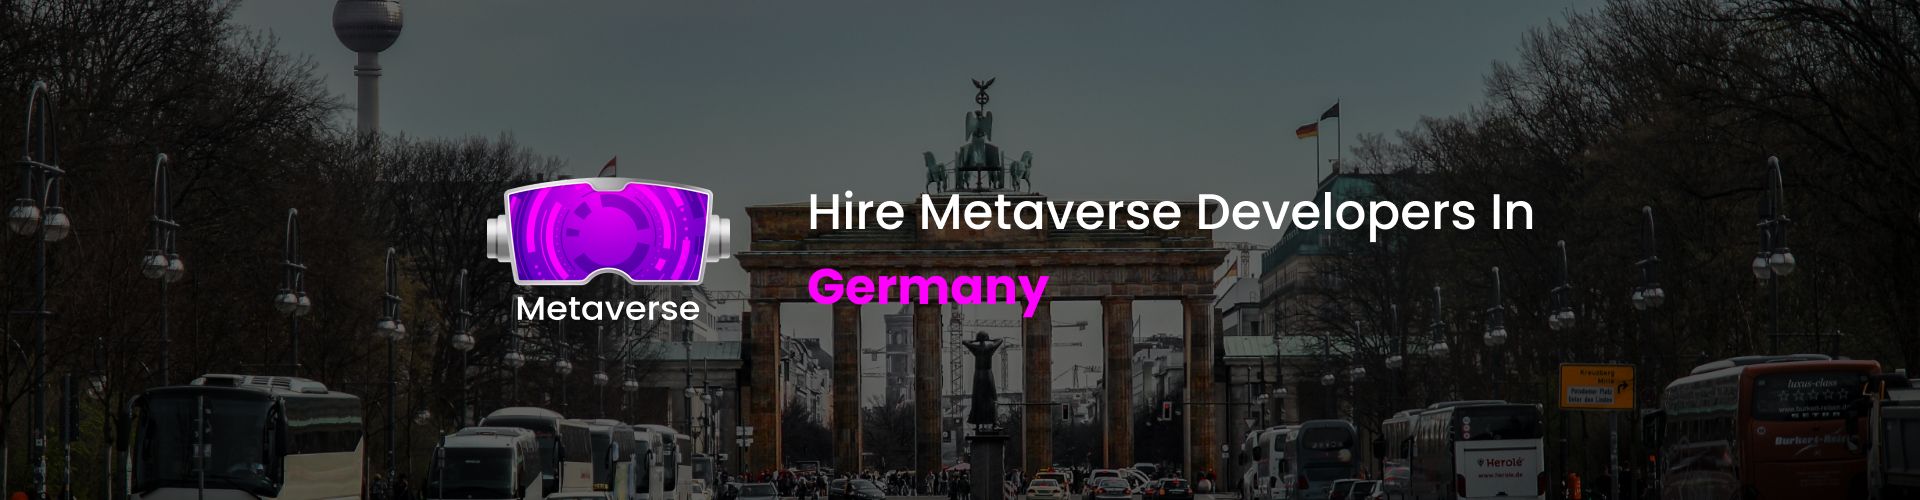 metaverse developers in germany